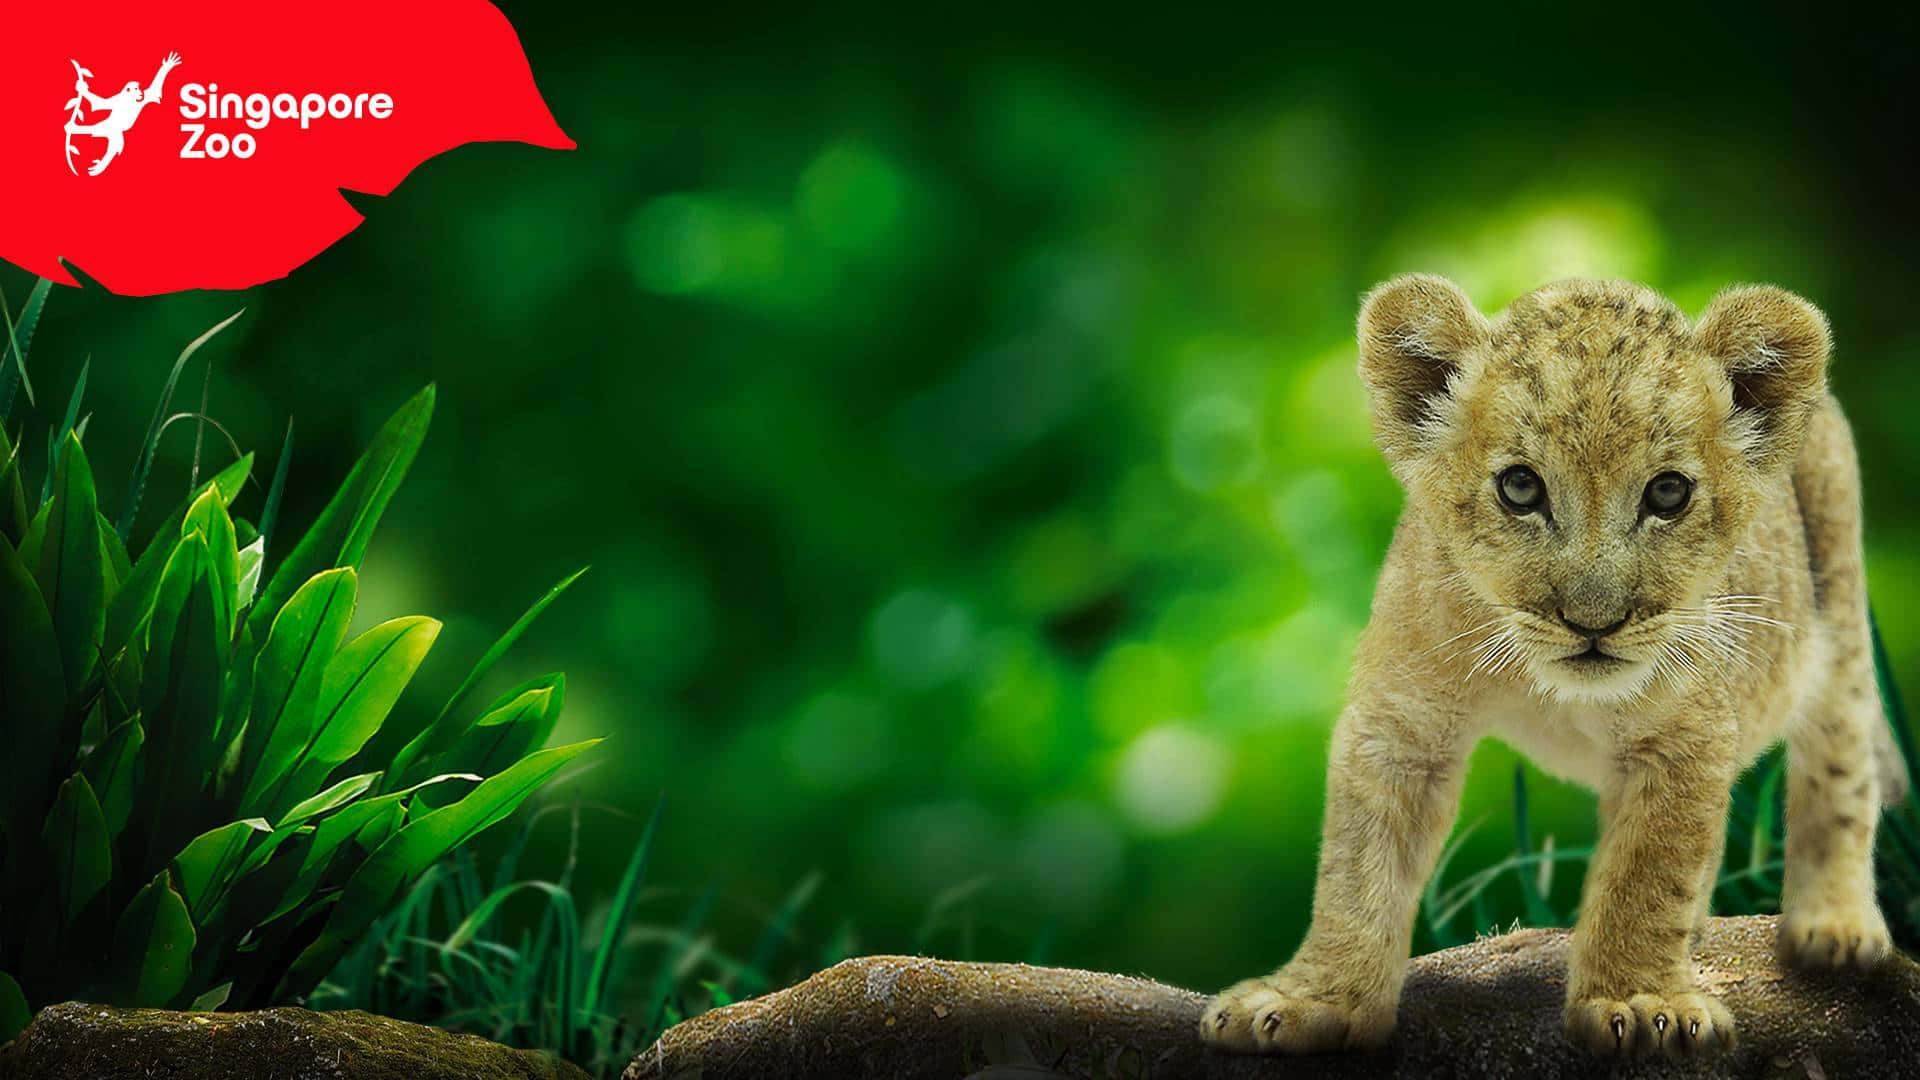 Cute Lion Cub In Singapore Zoo Background